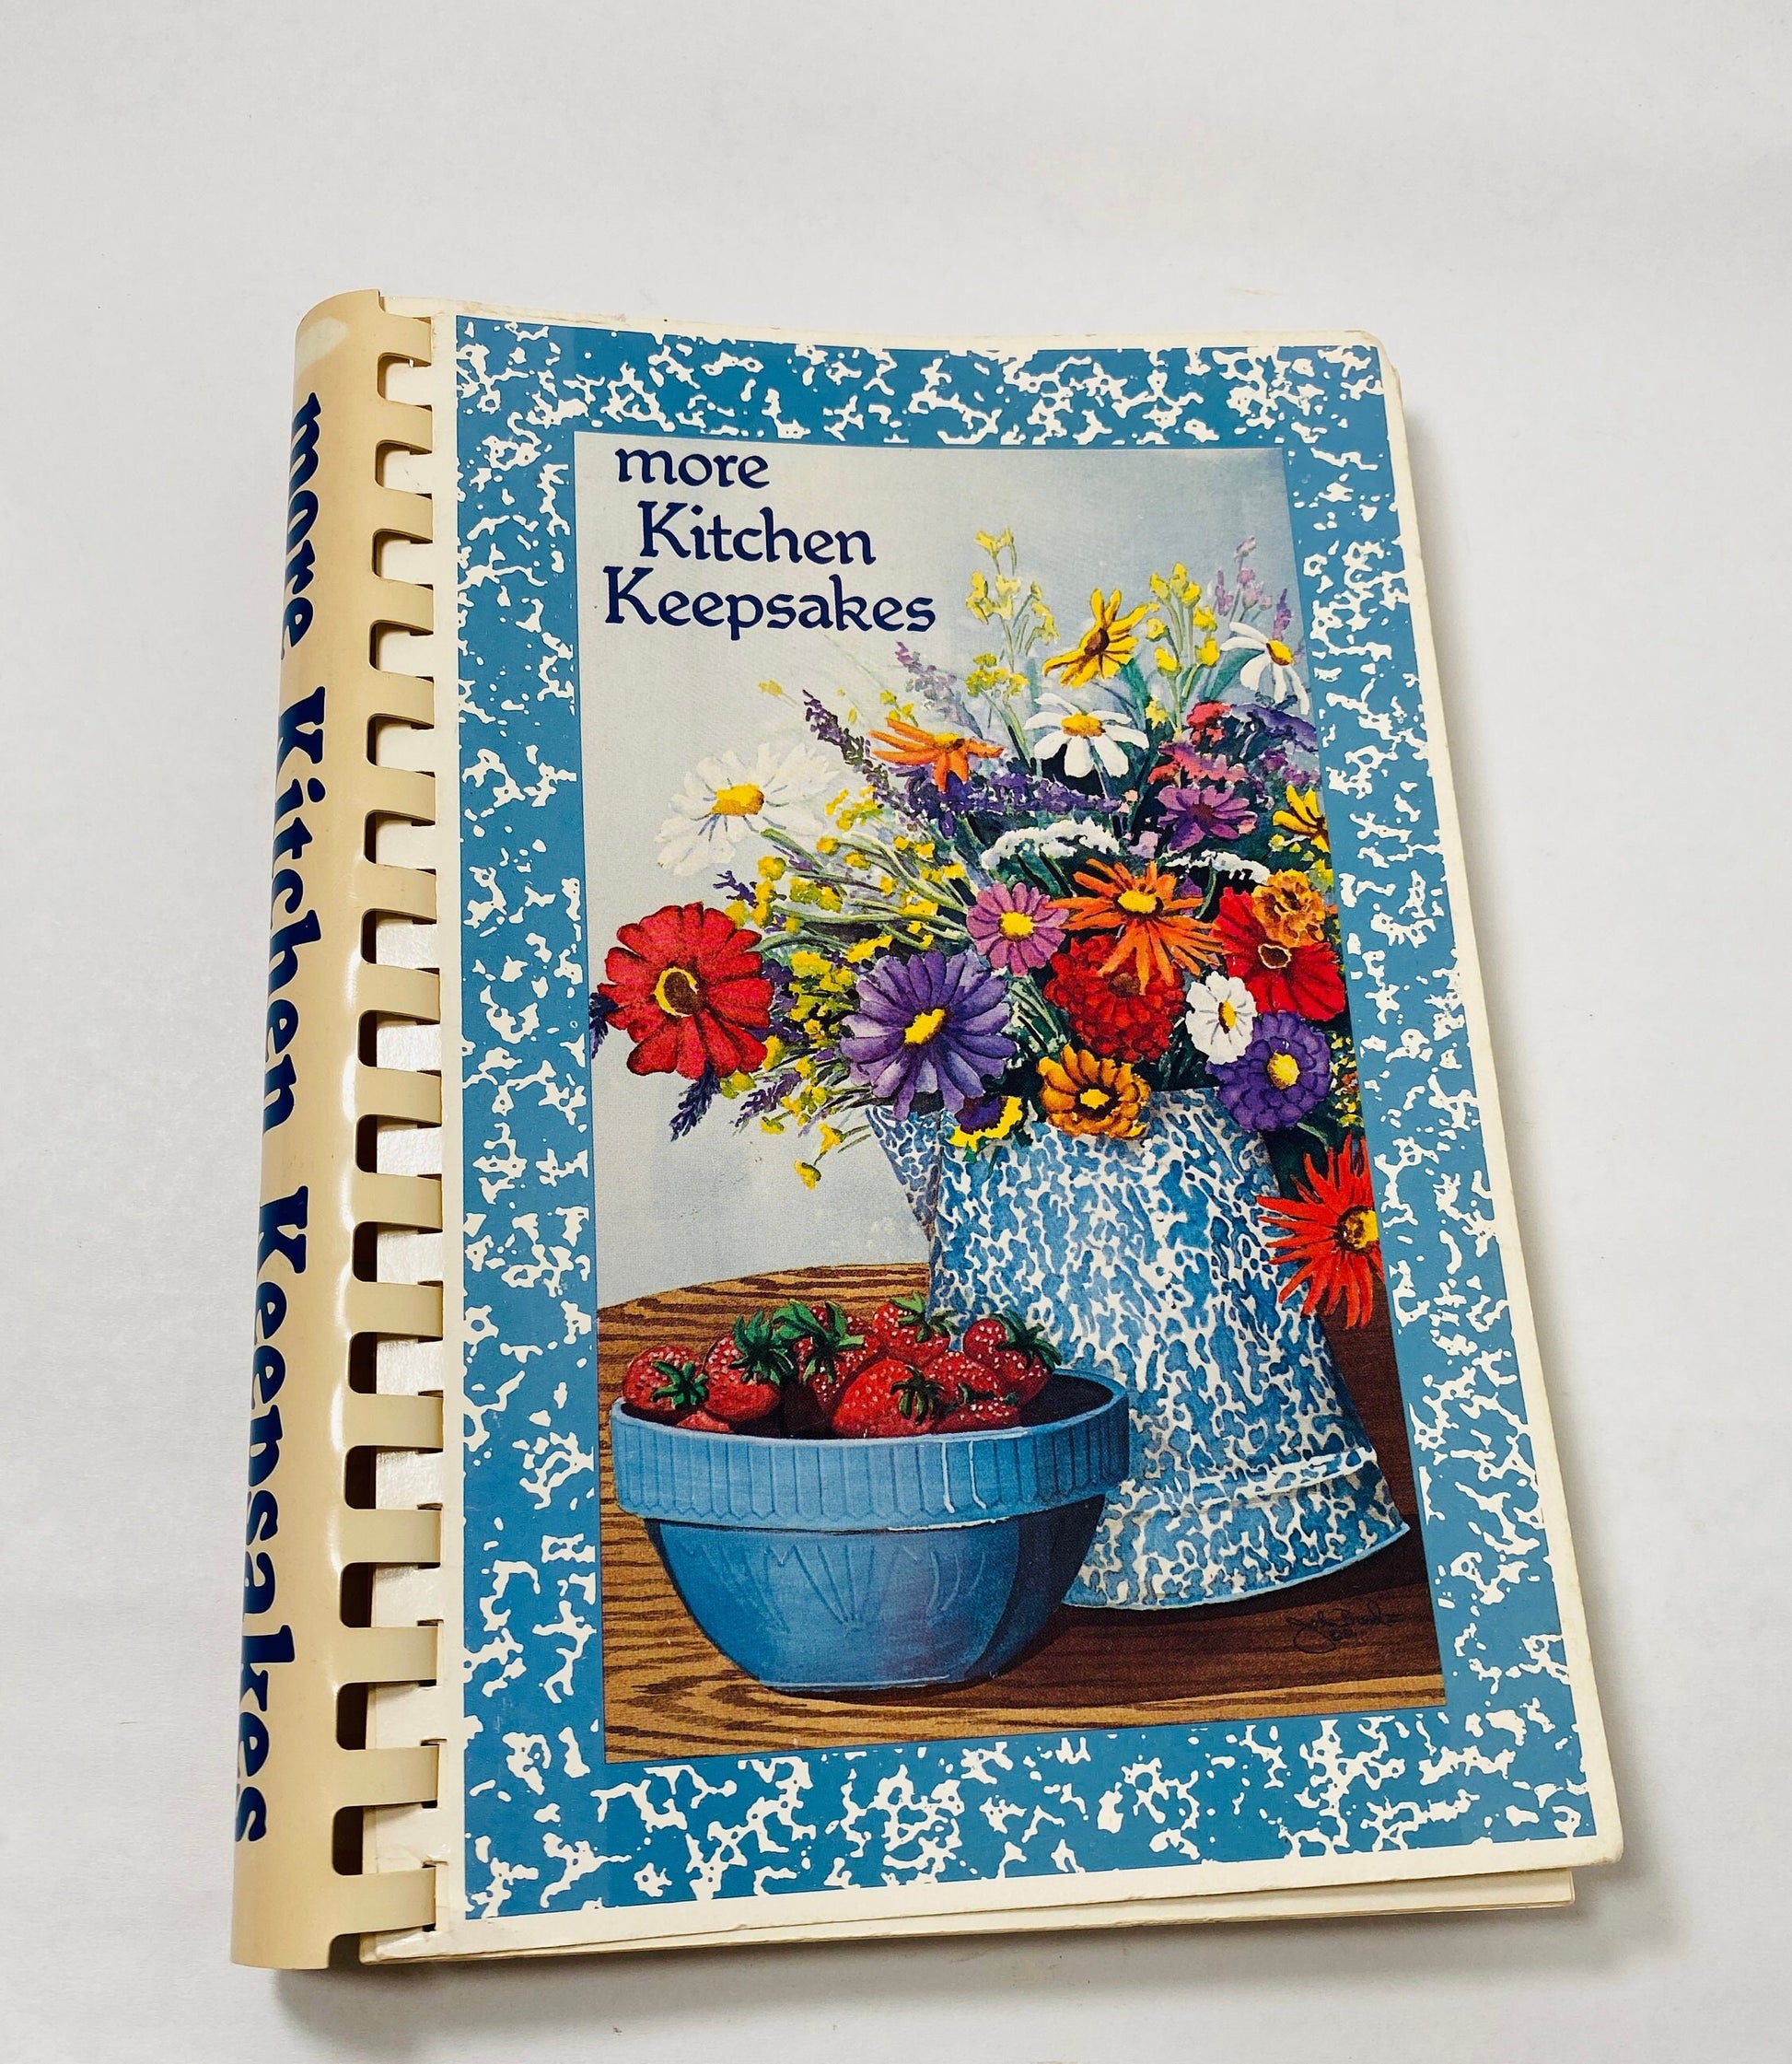 More Kitchen Keepsakes Cookbook EARLY PRINTING Vintage cookbook circa 1986 by Bonnie Welch. Family-Style Cooking